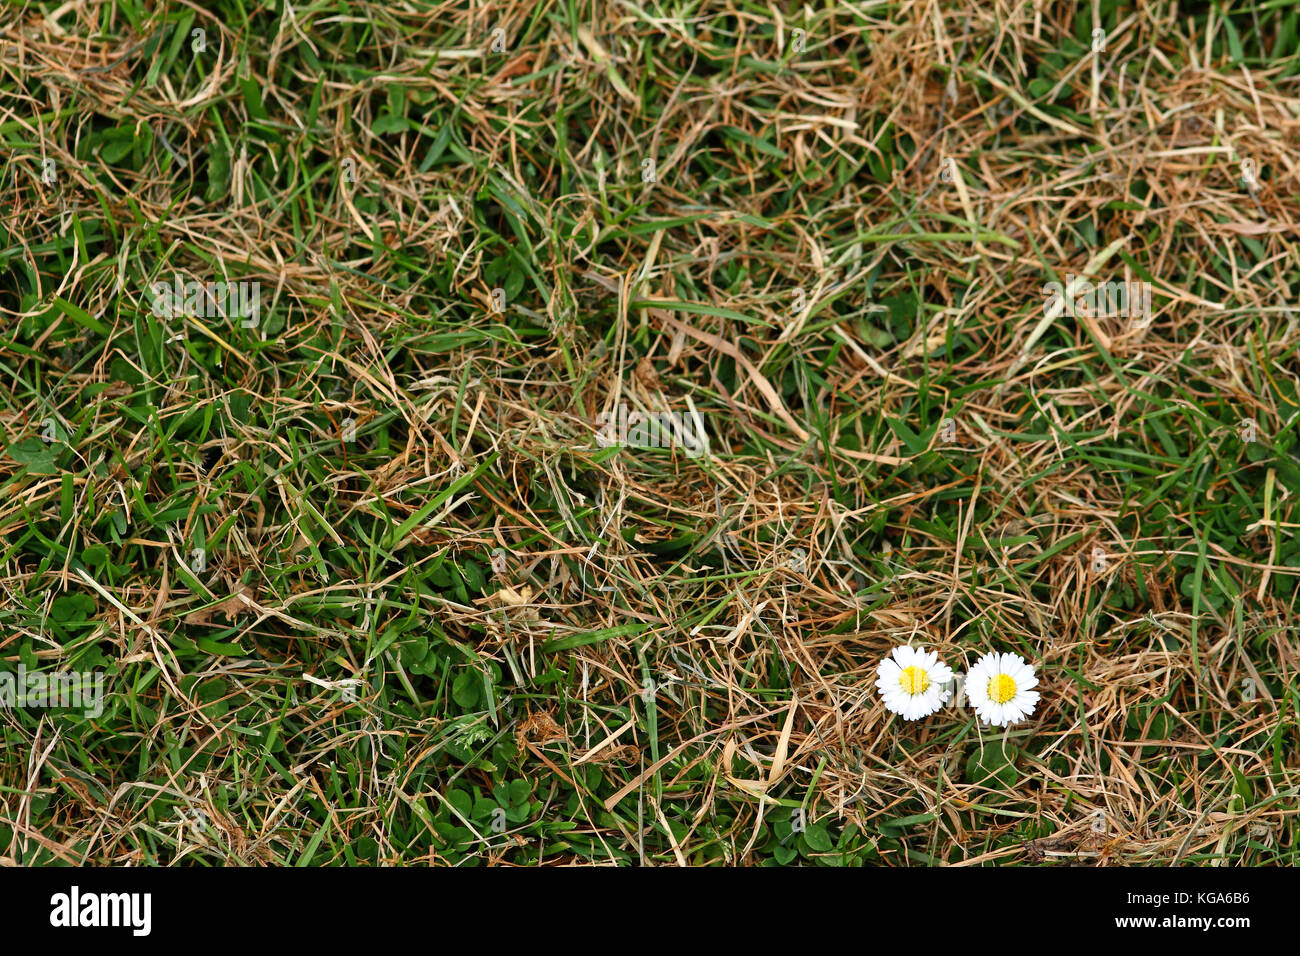 Daisies on a grass lawn in summer Stock Photo